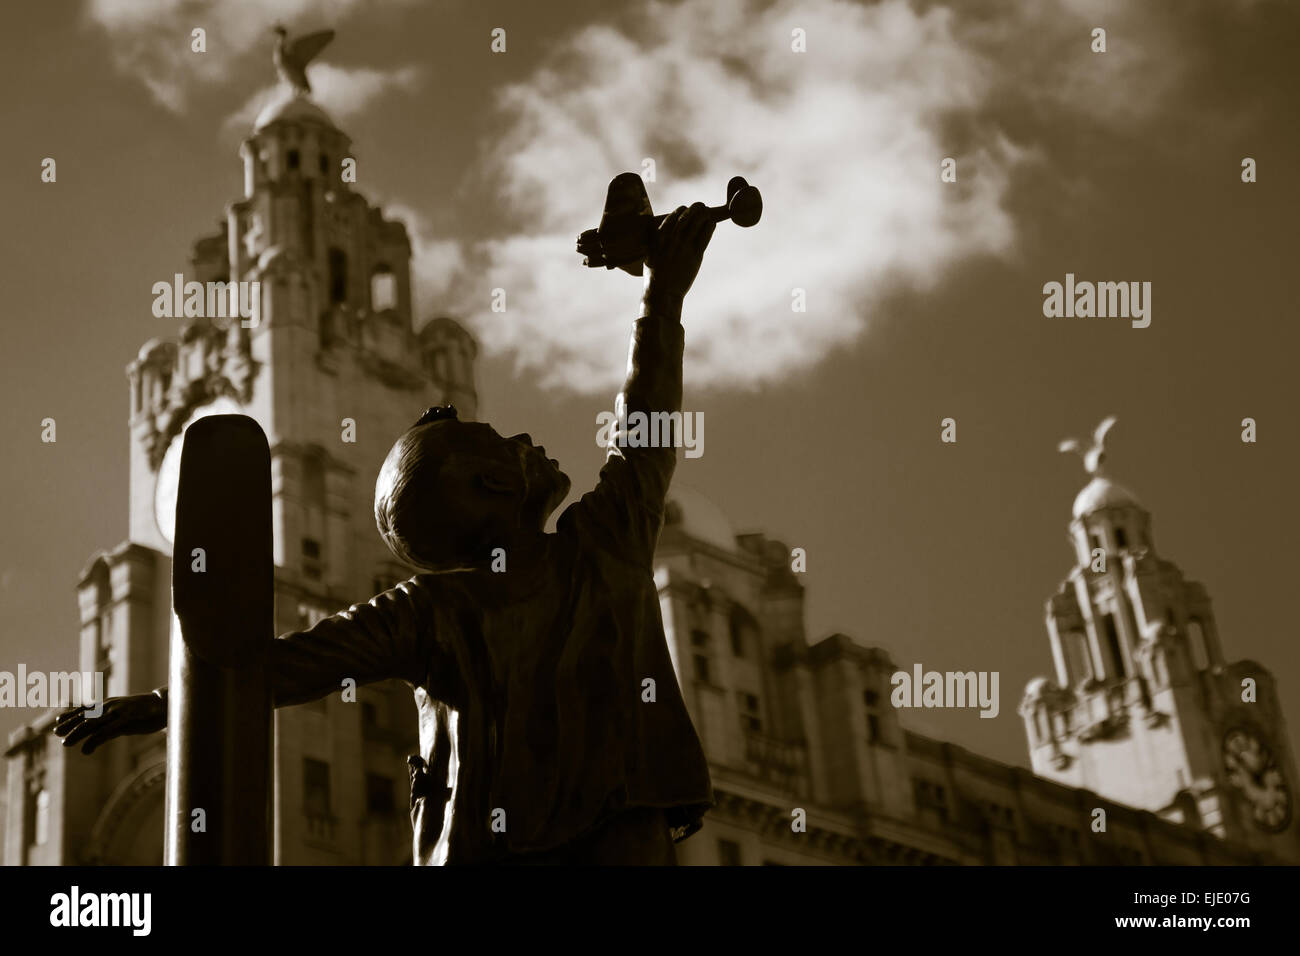 Statue of a boy playing with this toy aircraft. Stock Photo